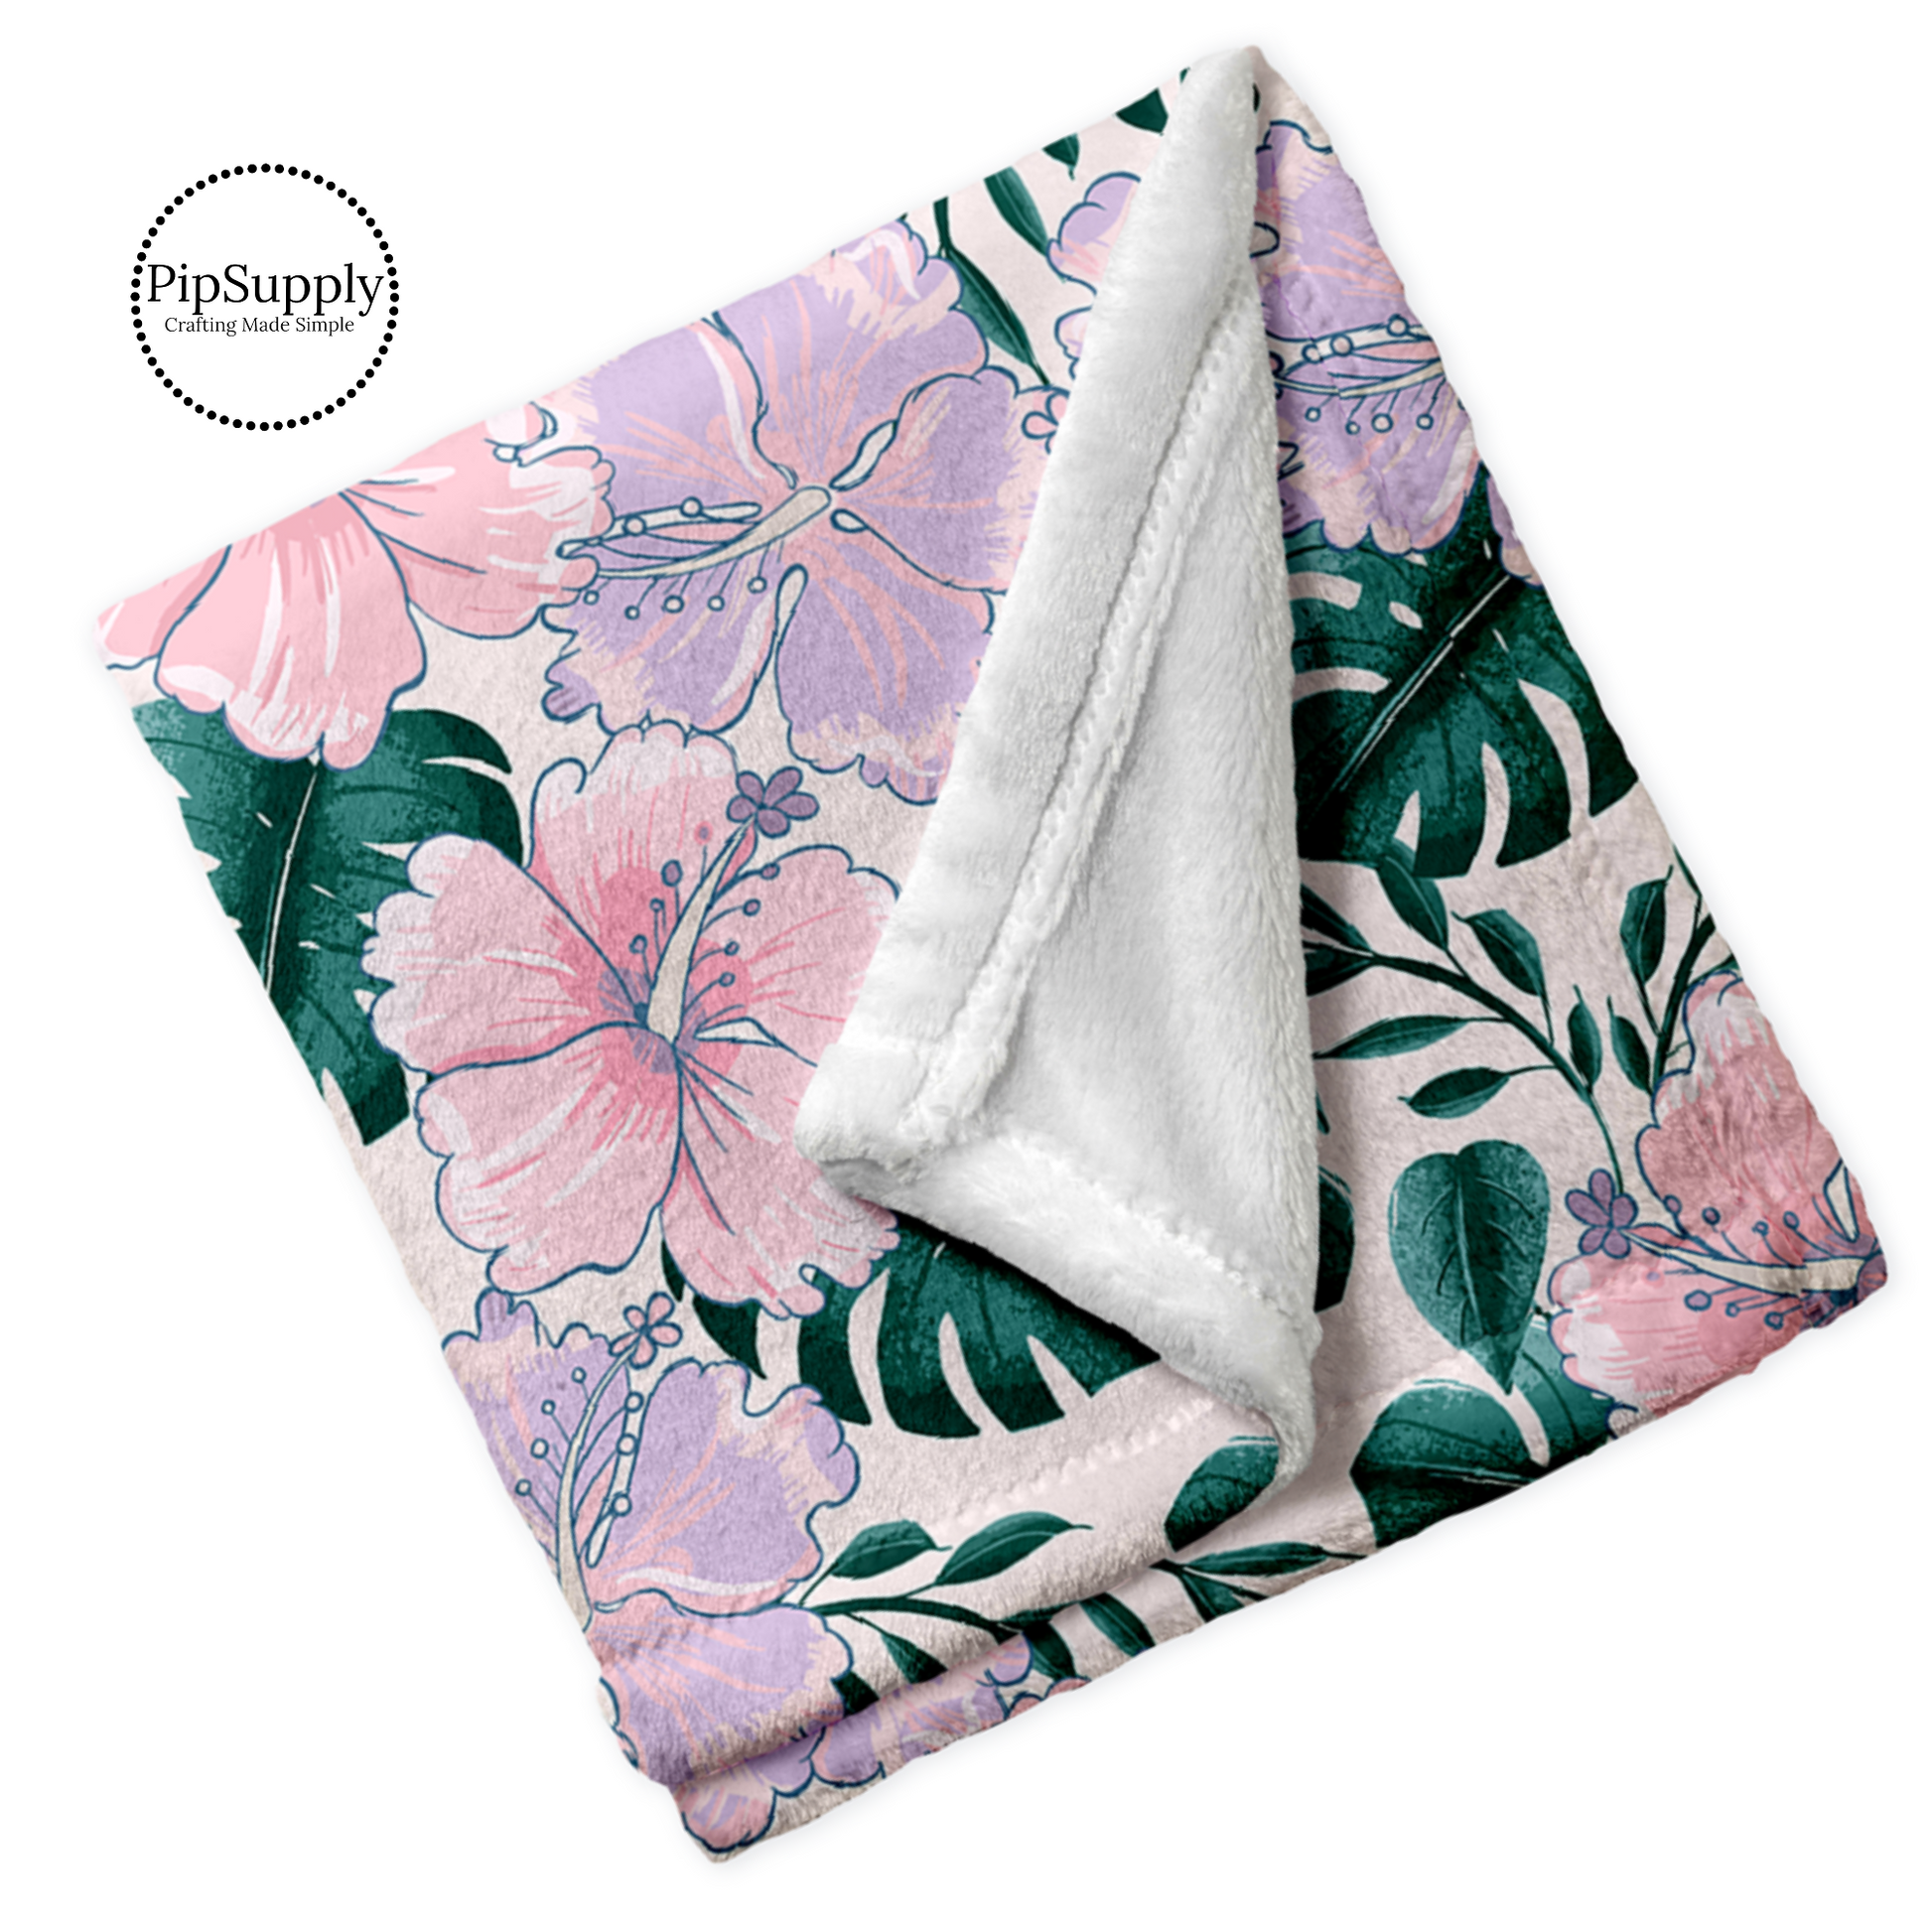 Folded soft white blanket with light pink and lavender hibiscus floral with tropical green leaves pattern.